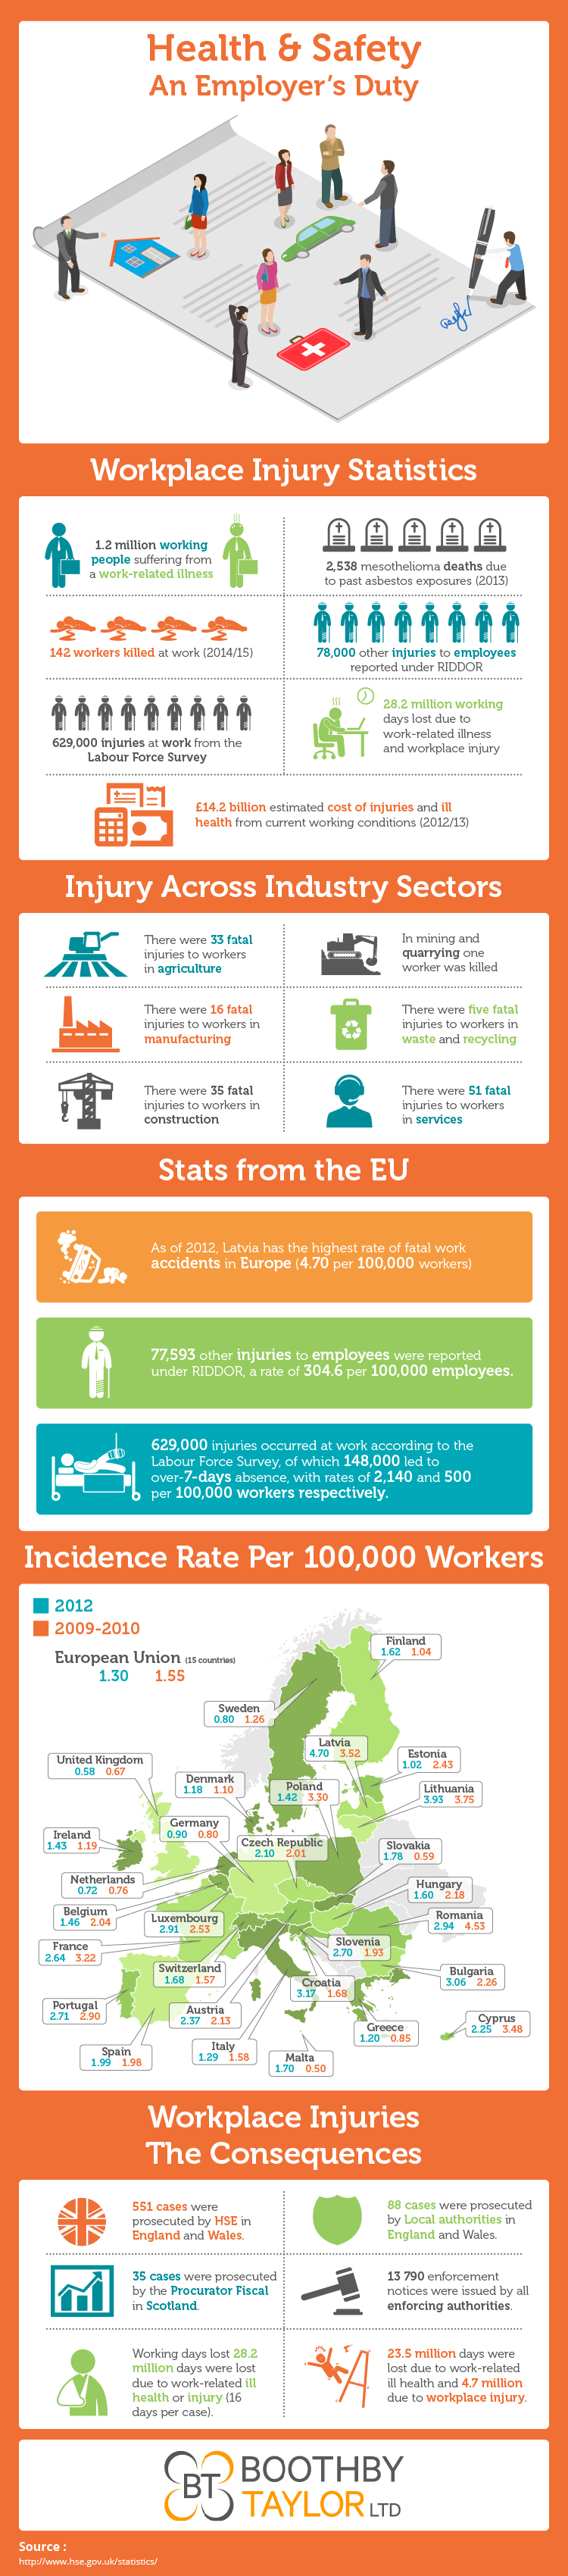 boothby-taylor-health-and-safety-infographic